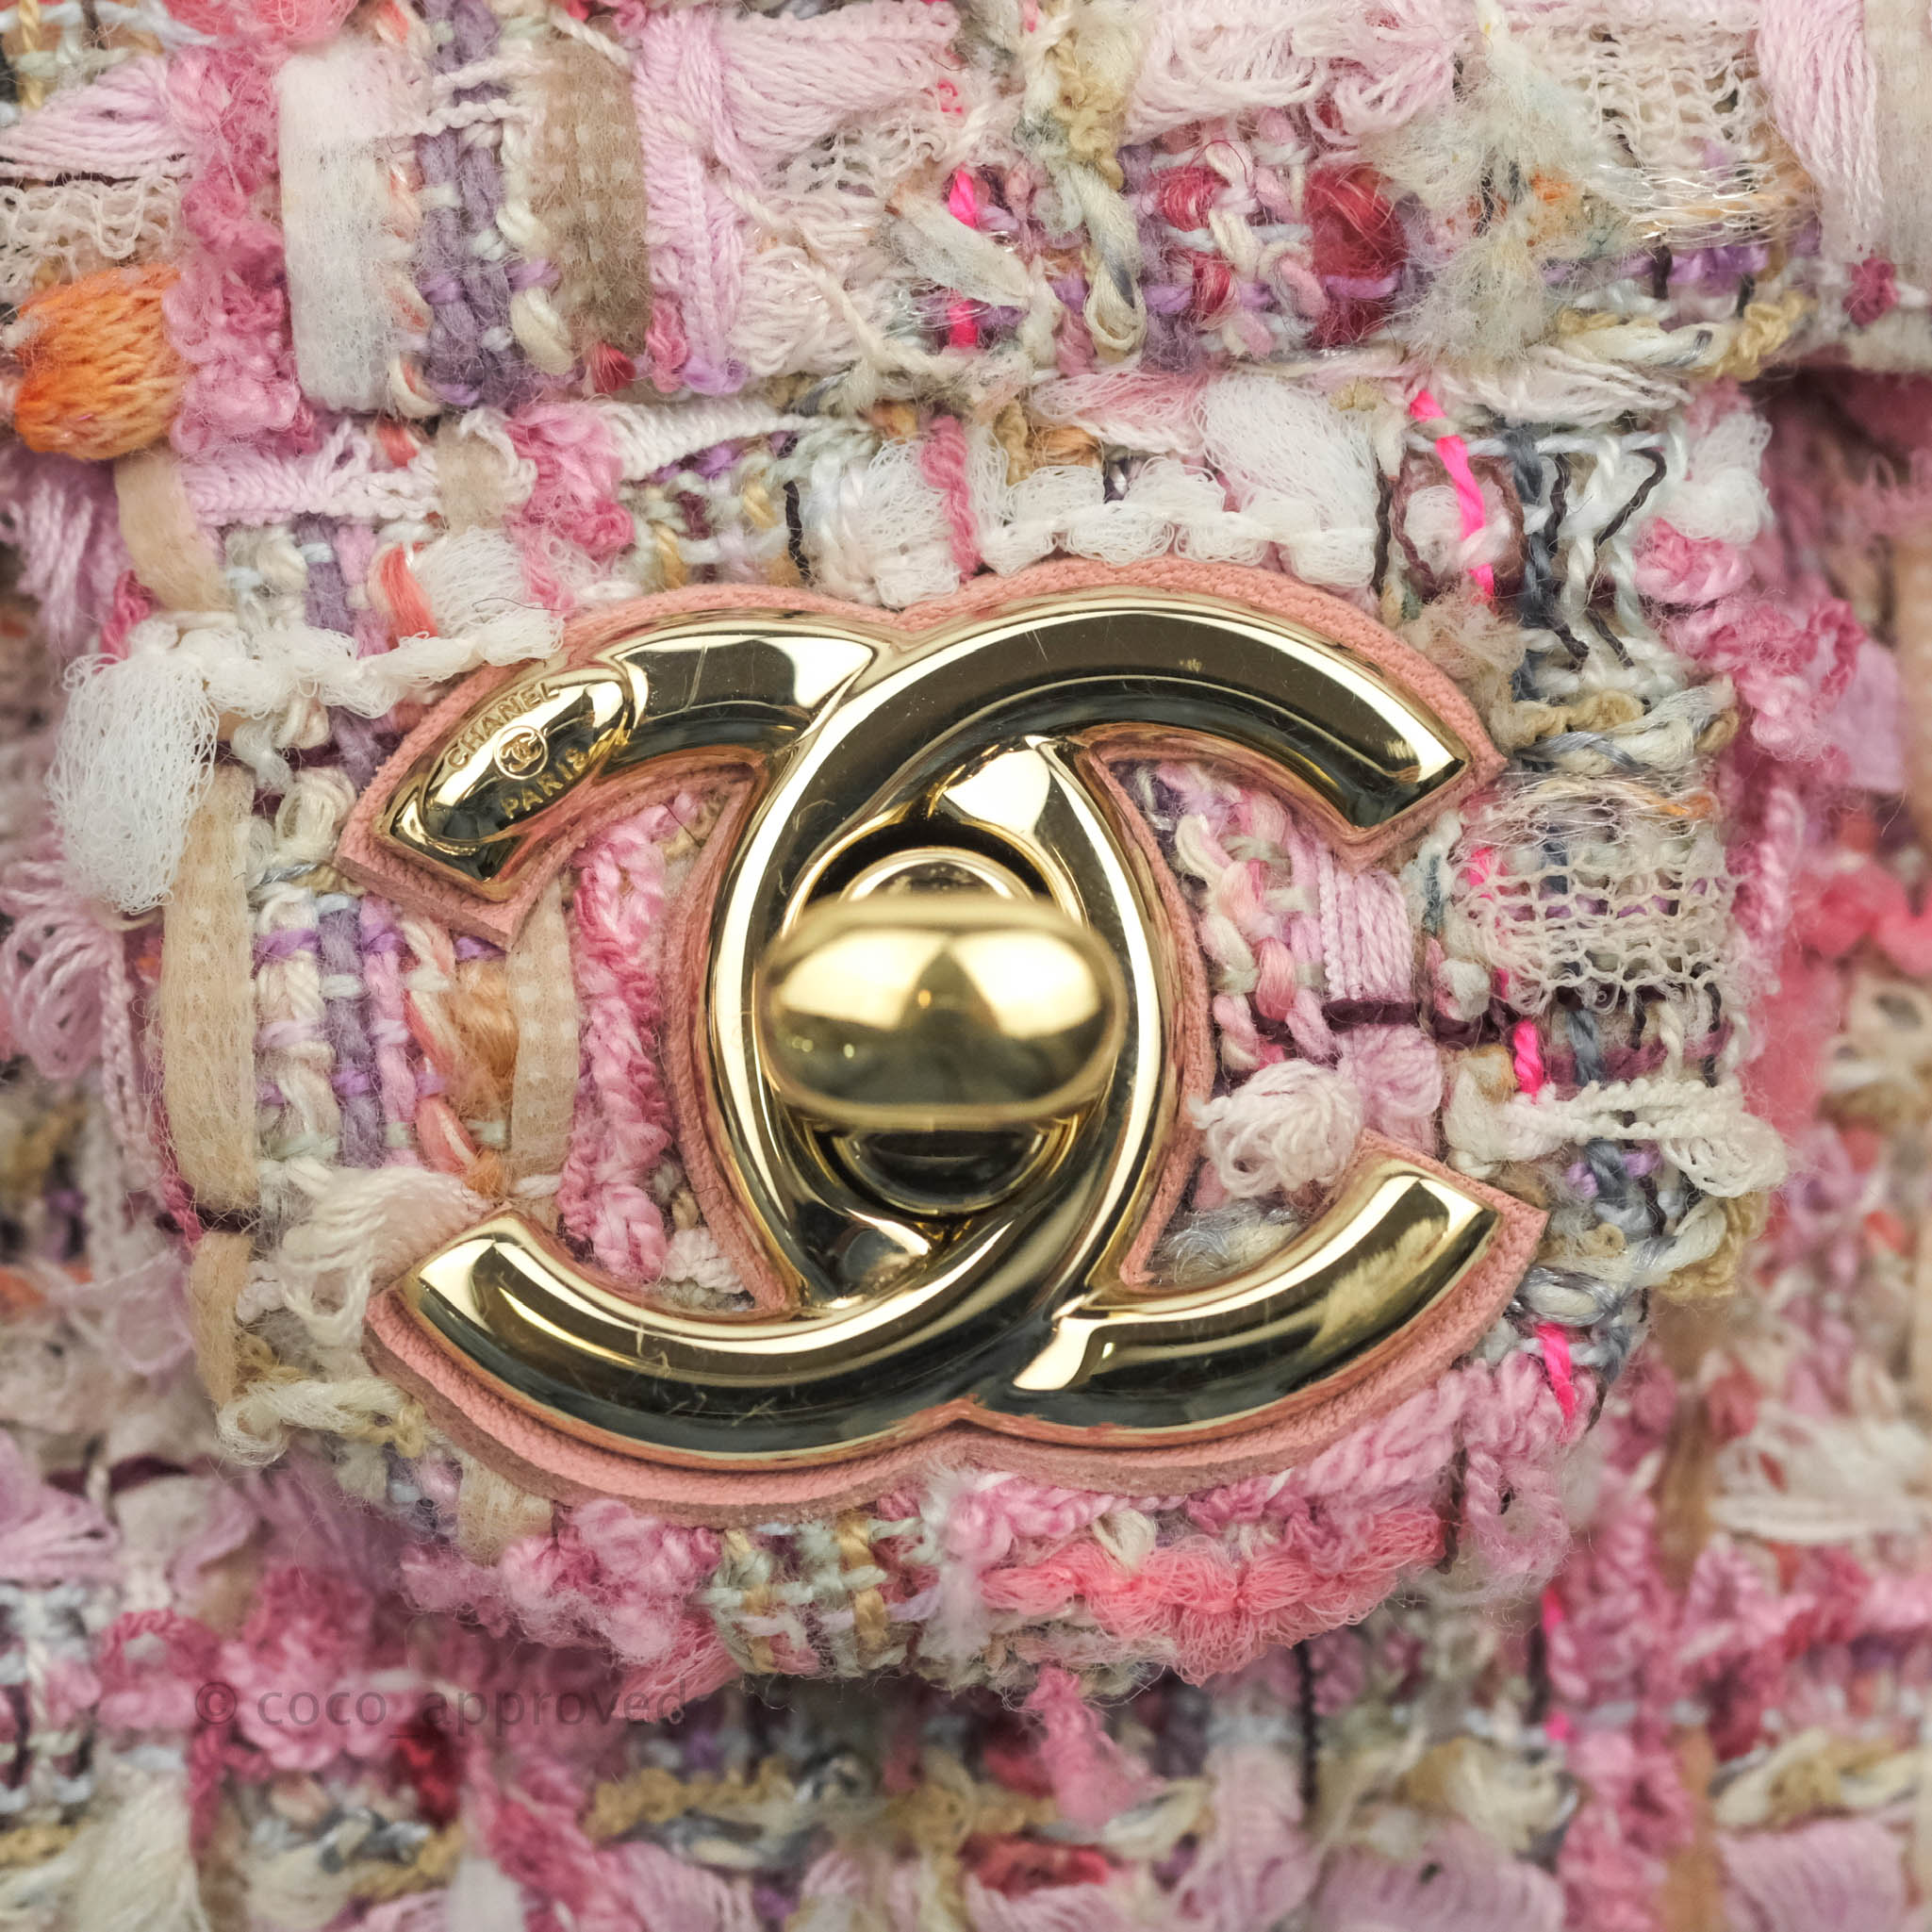 Chanel Small Pink Tweed Flap Bag With Large Pearl Handle Gold